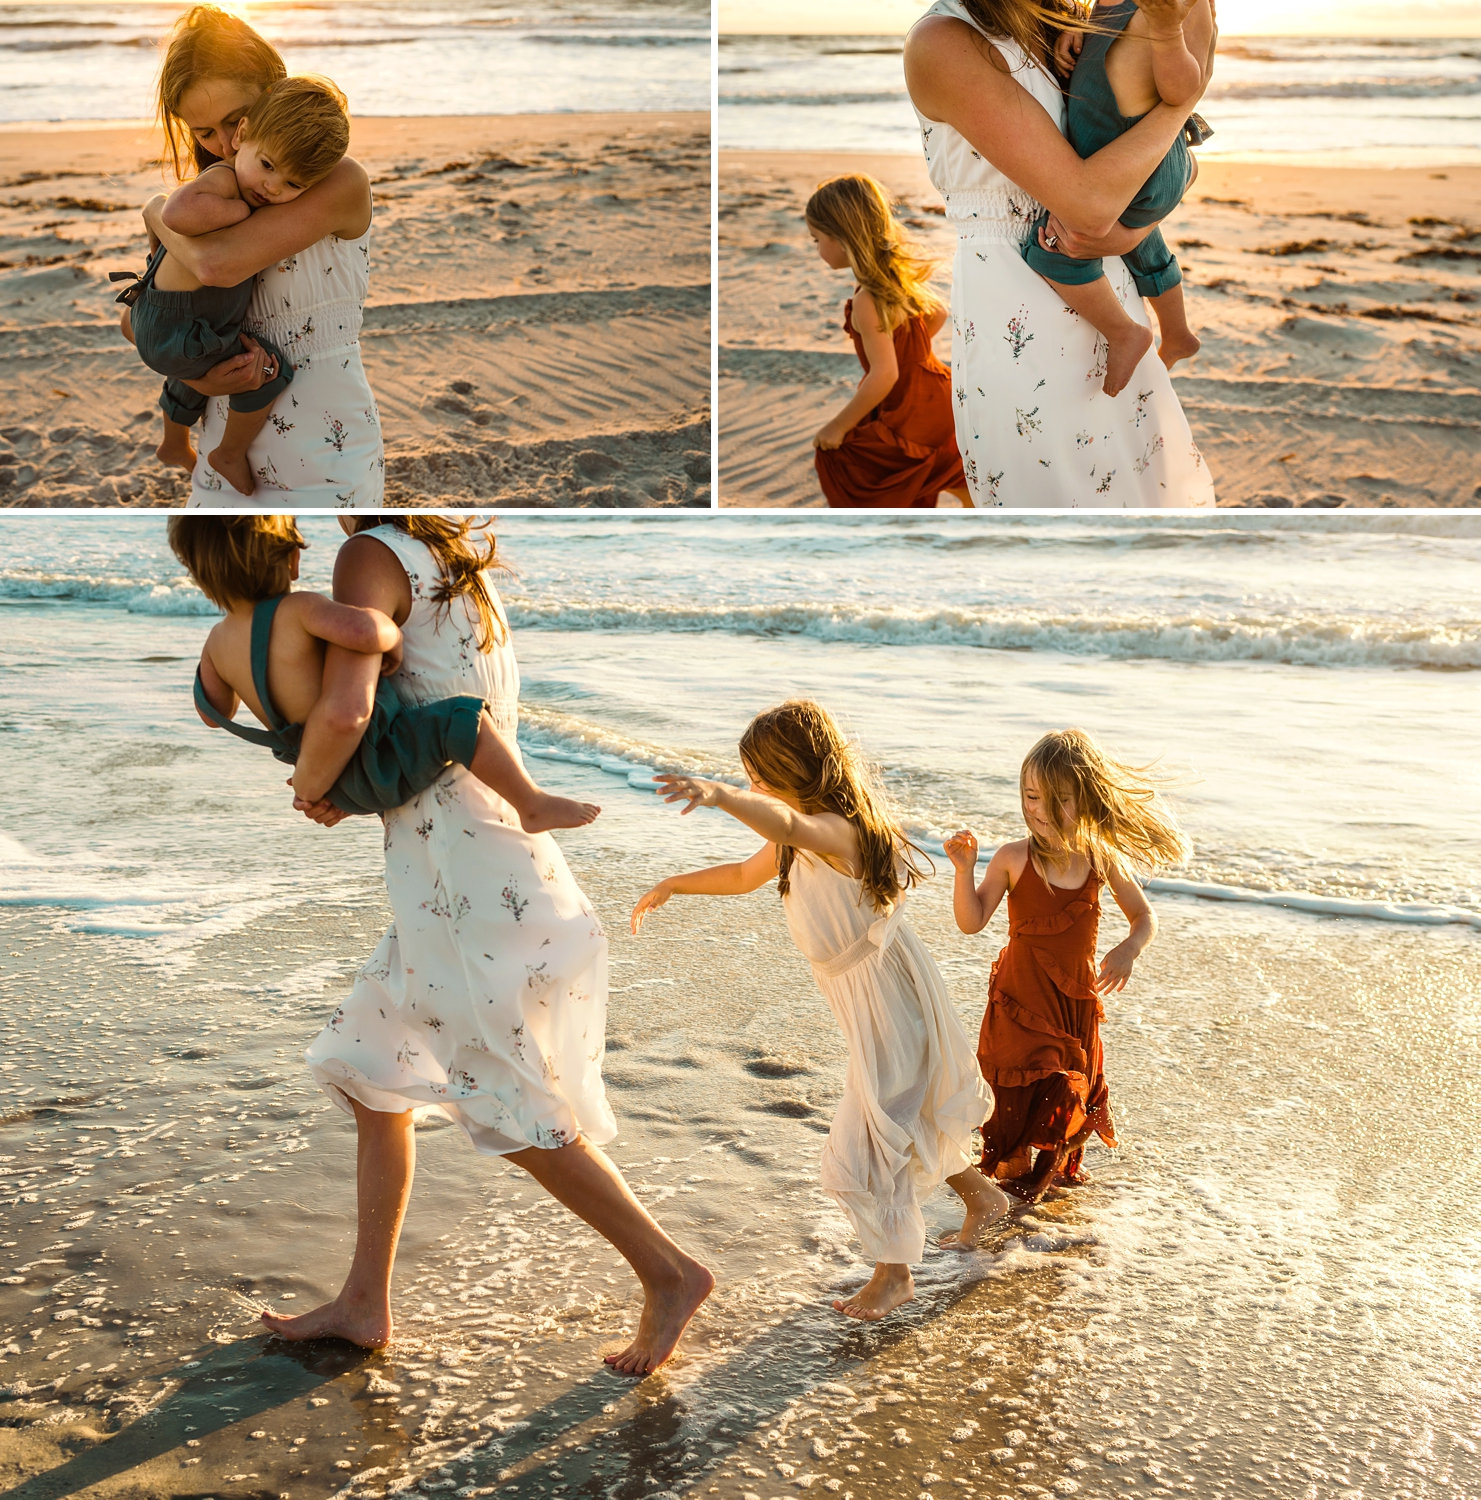 image collage, mother nuzzling infant son, mother holding baby boy, mother playing with her children on a beach